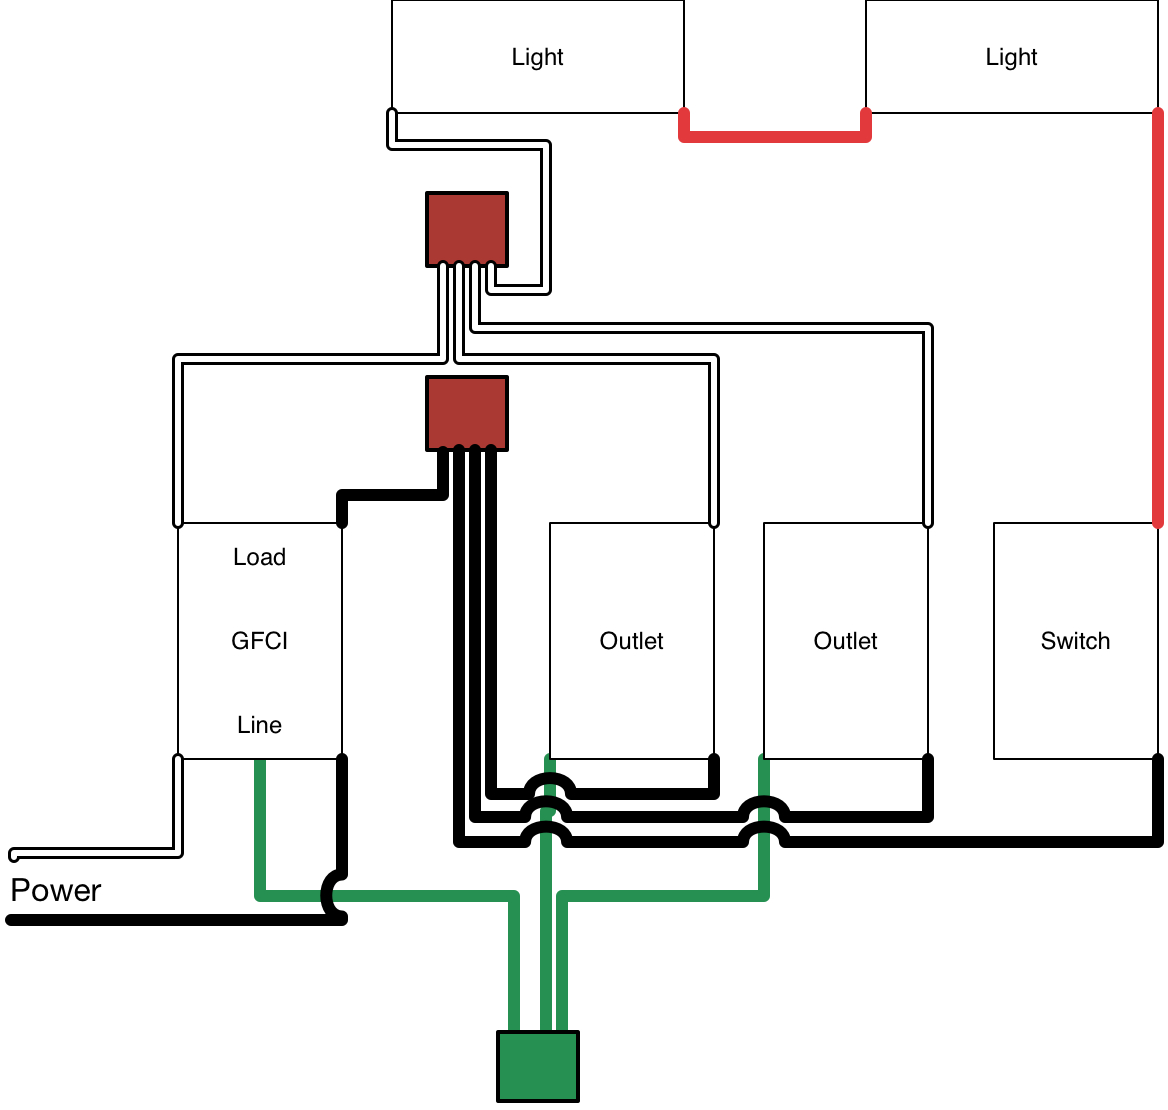 Gfci Light Wiring Diagram - Wiring Diagram Name - Gfci Outlet With Switch Wiring Diagram